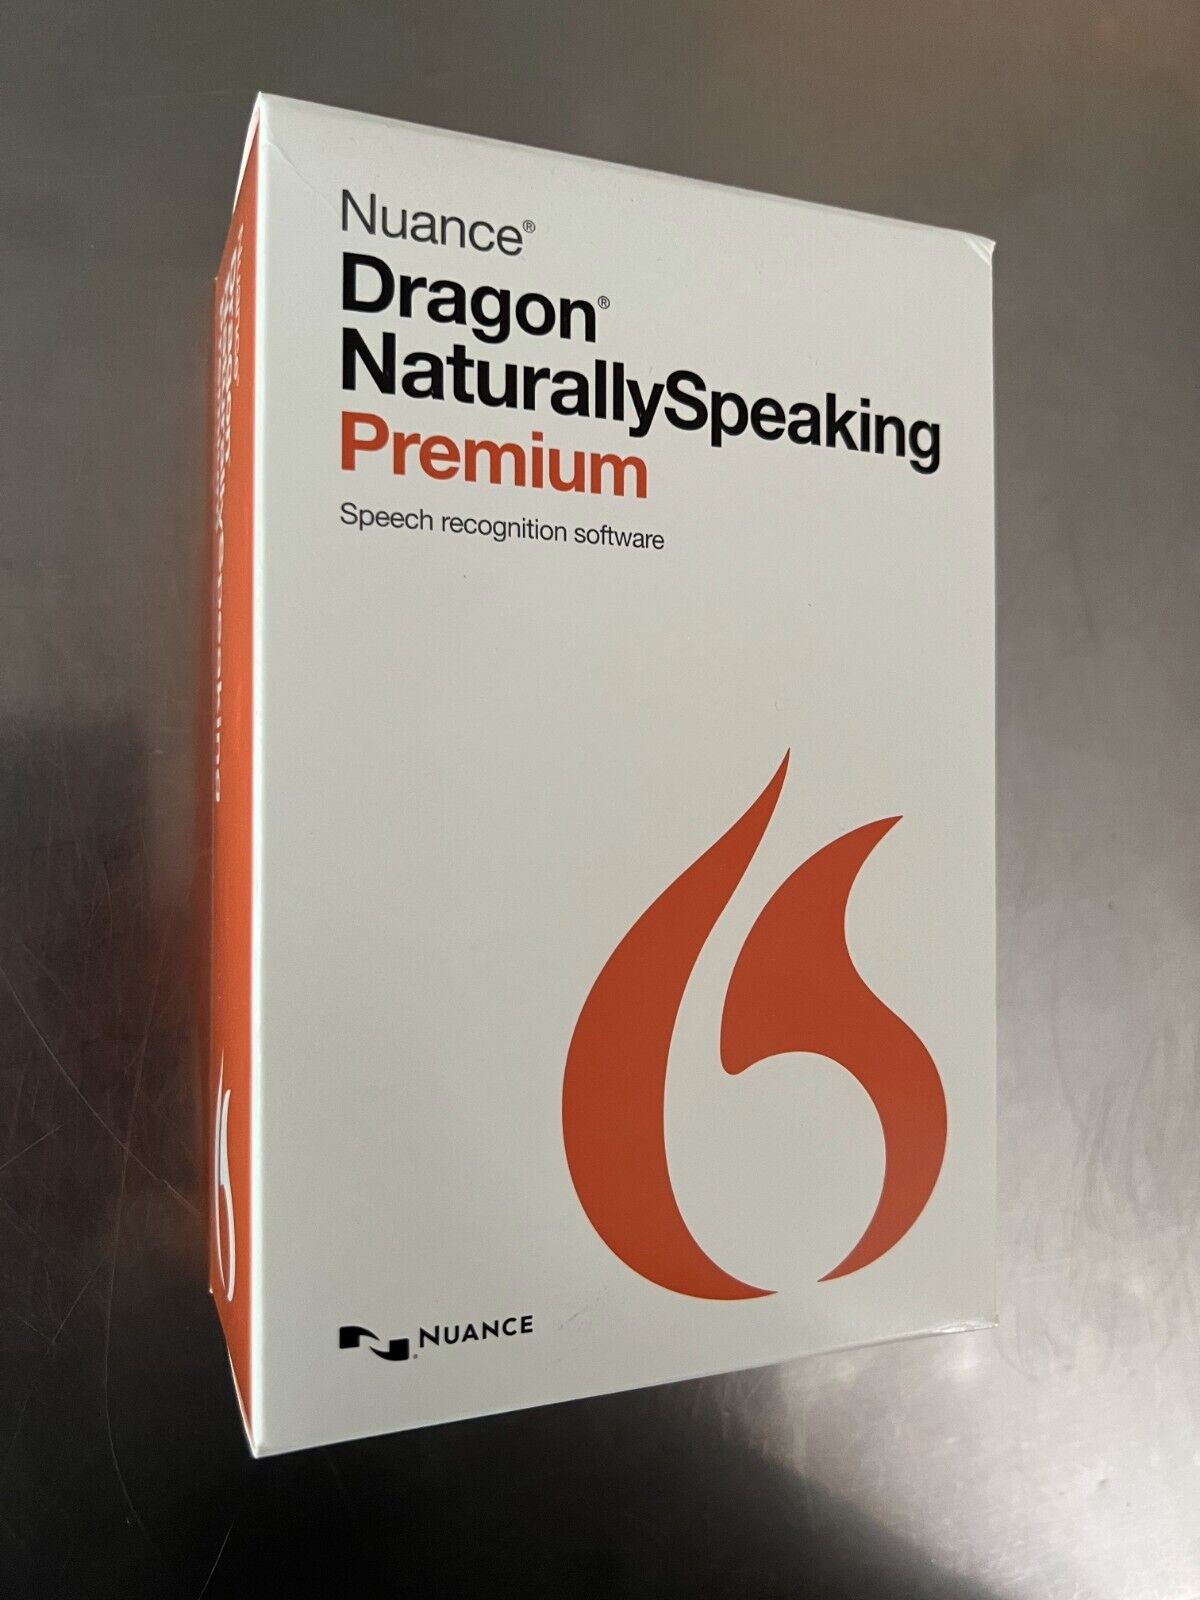 New, Factory Sealed Nuance Dragon Naturally Speaking Premium 13 with Microphone